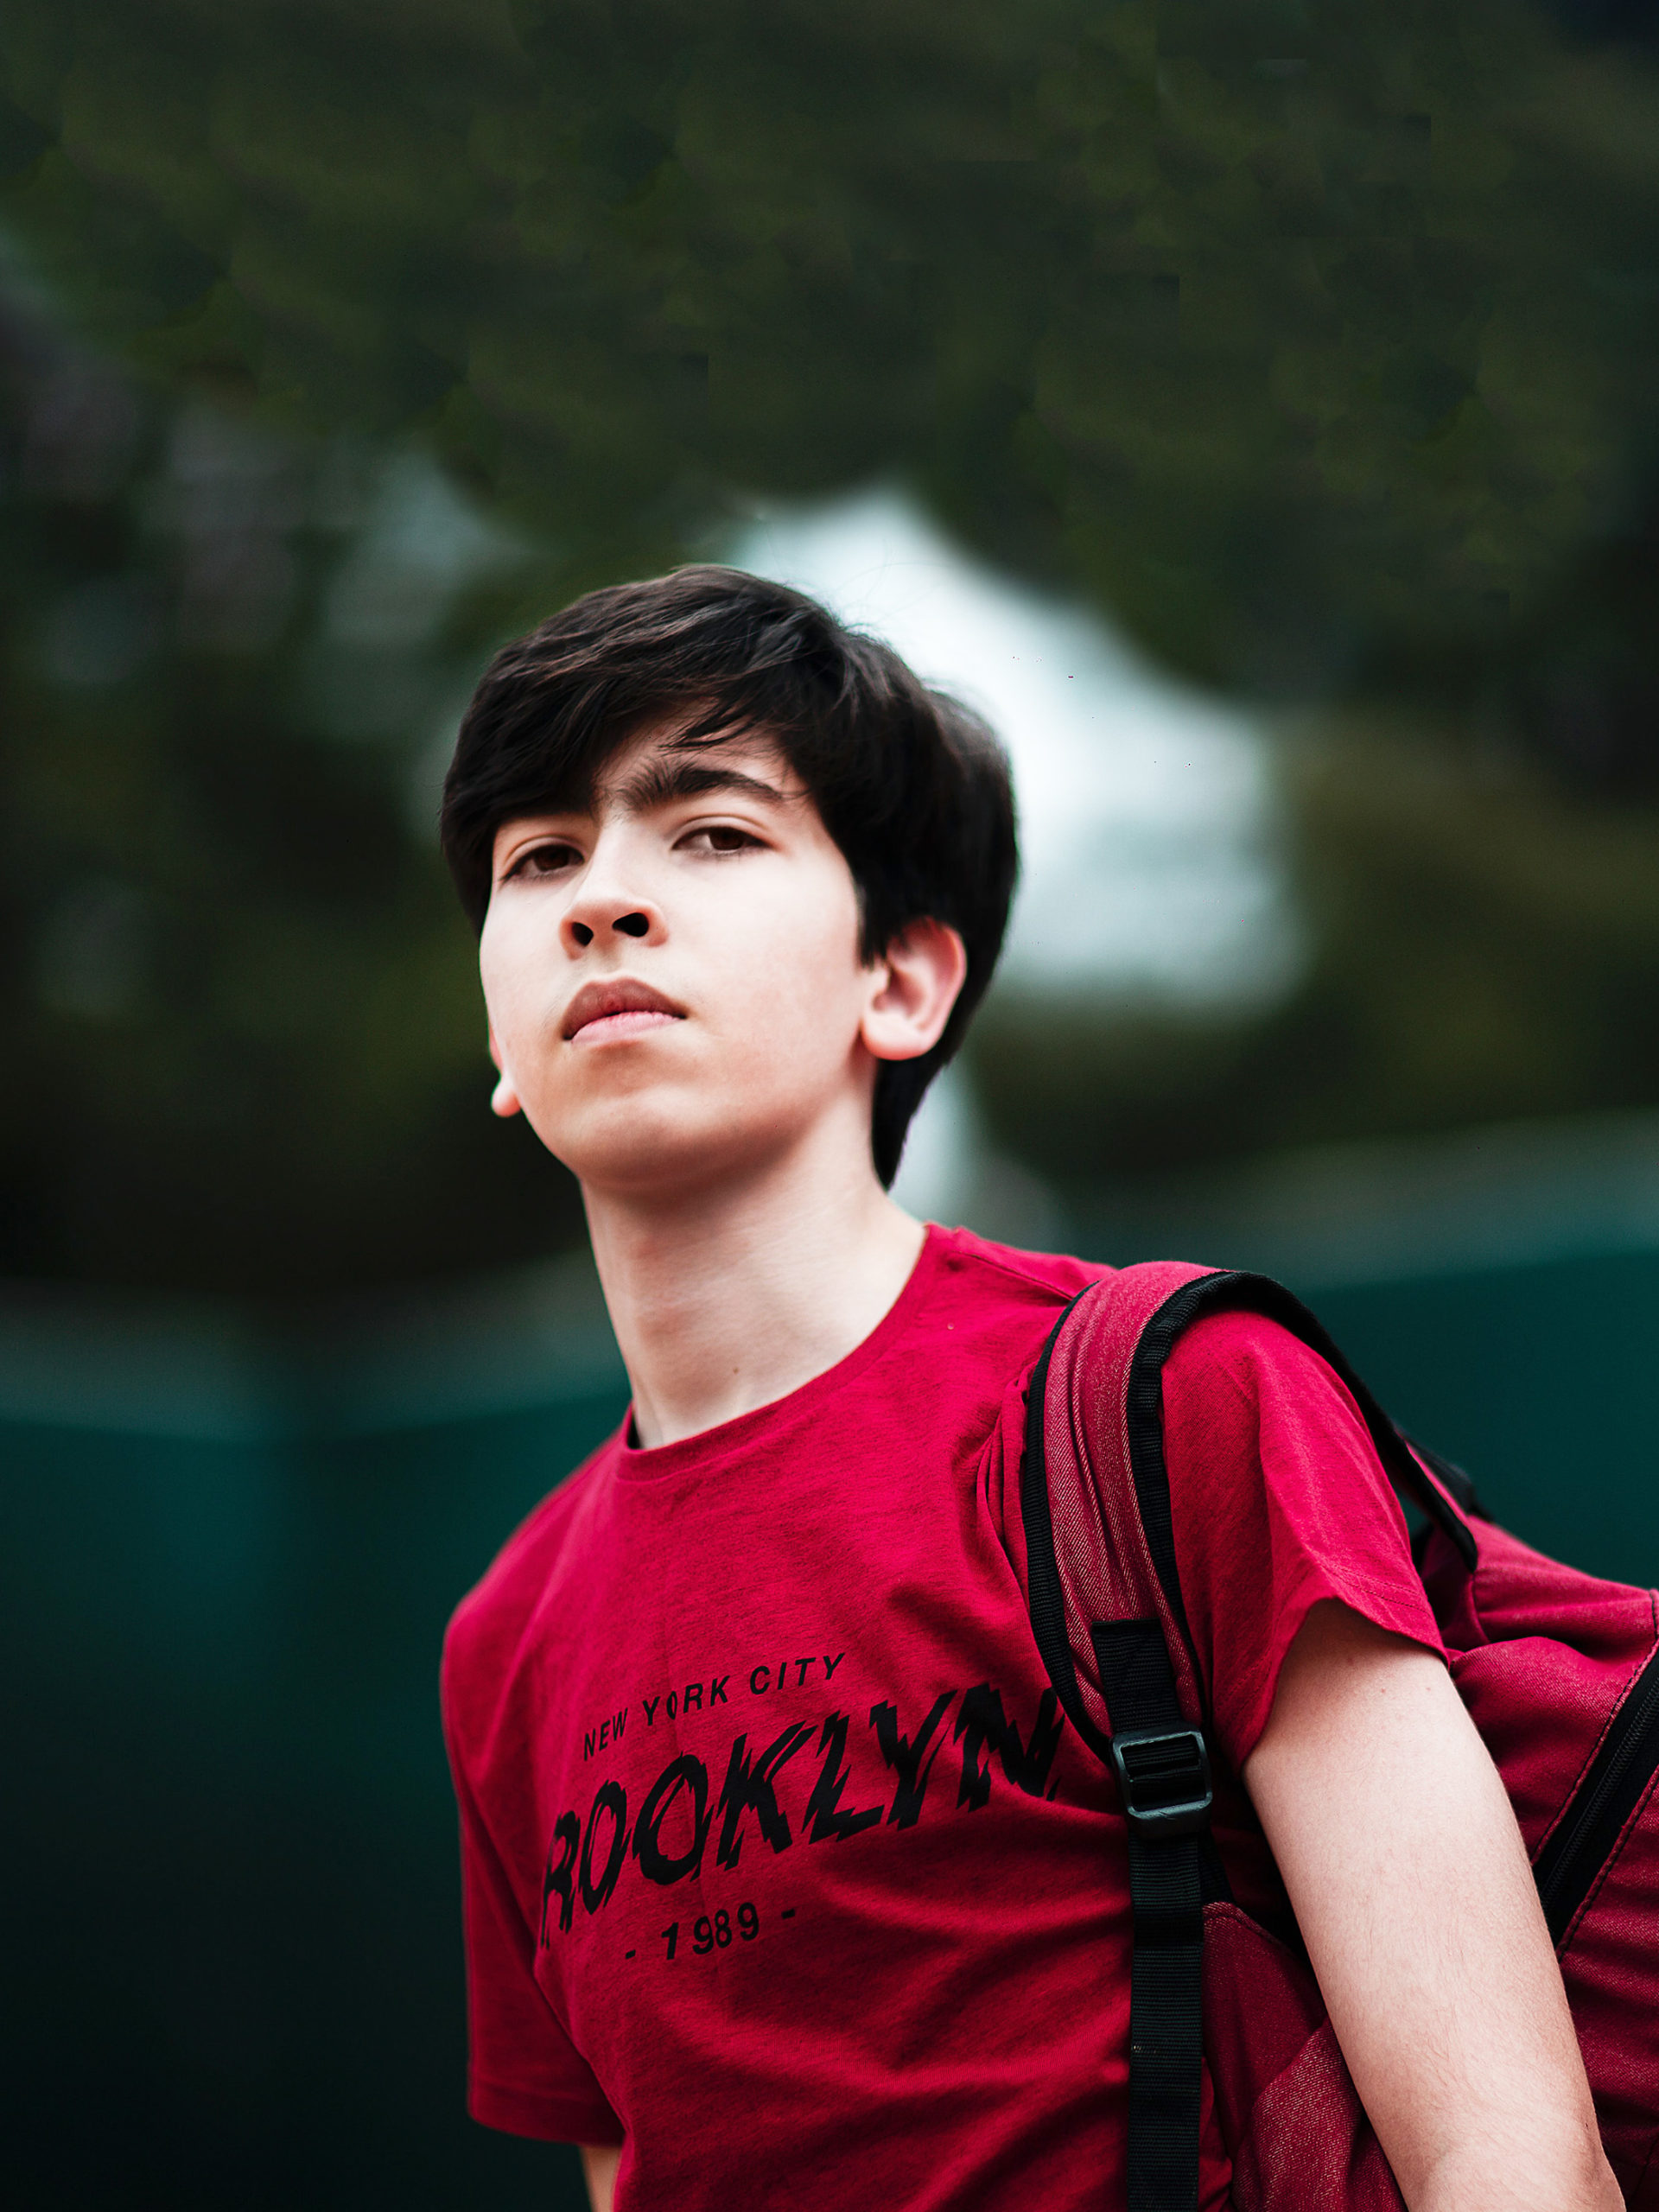 teen boy with backpack looking serious